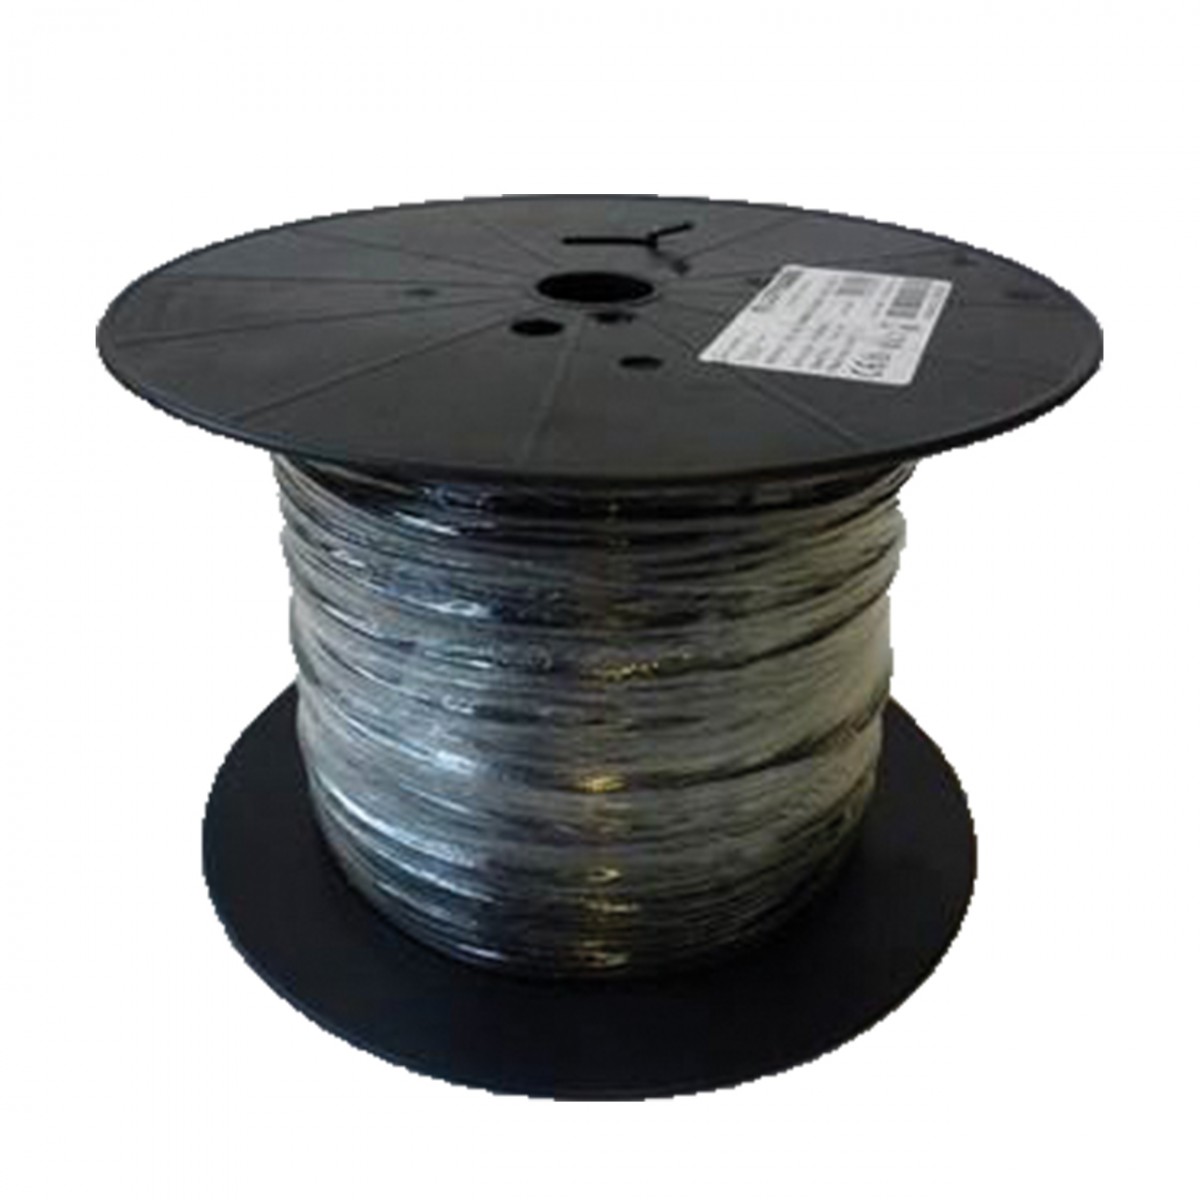 Reinforced Robo Signal Cable - 300M boundary wire